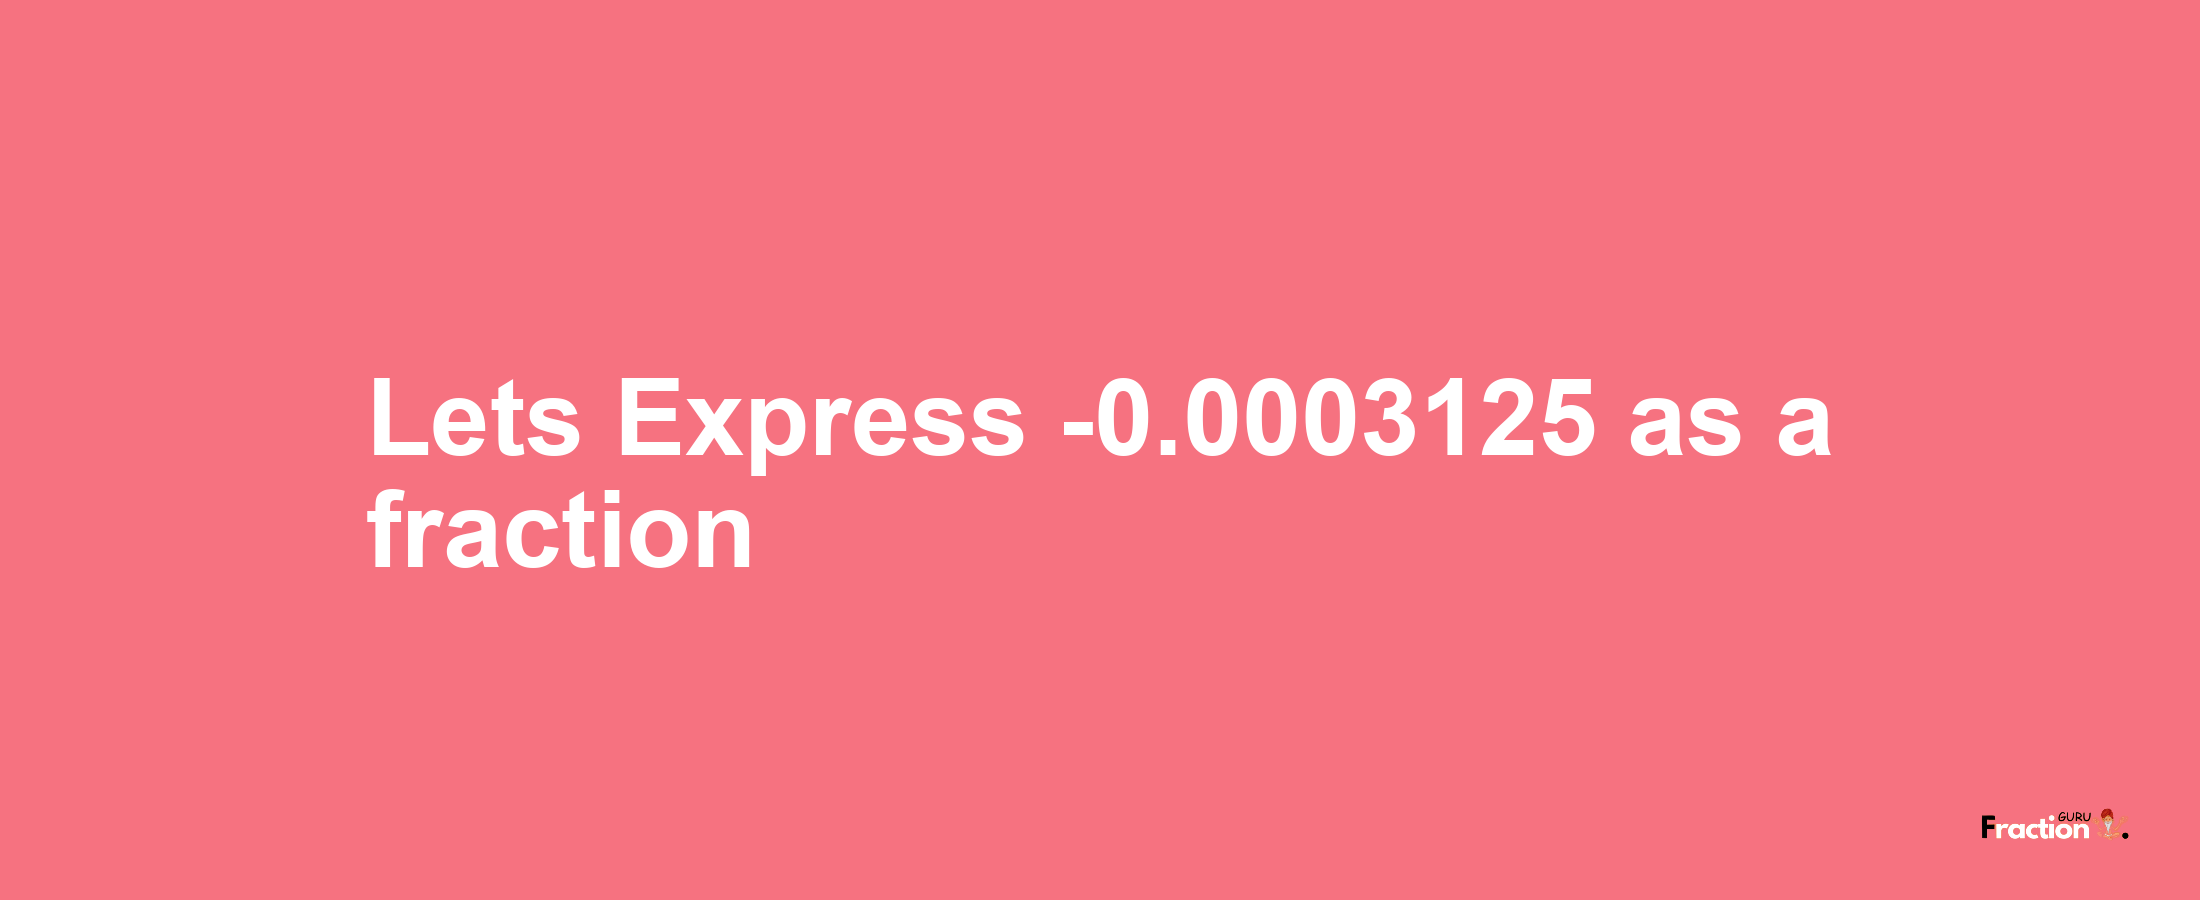 Lets Express -0.0003125 as afraction